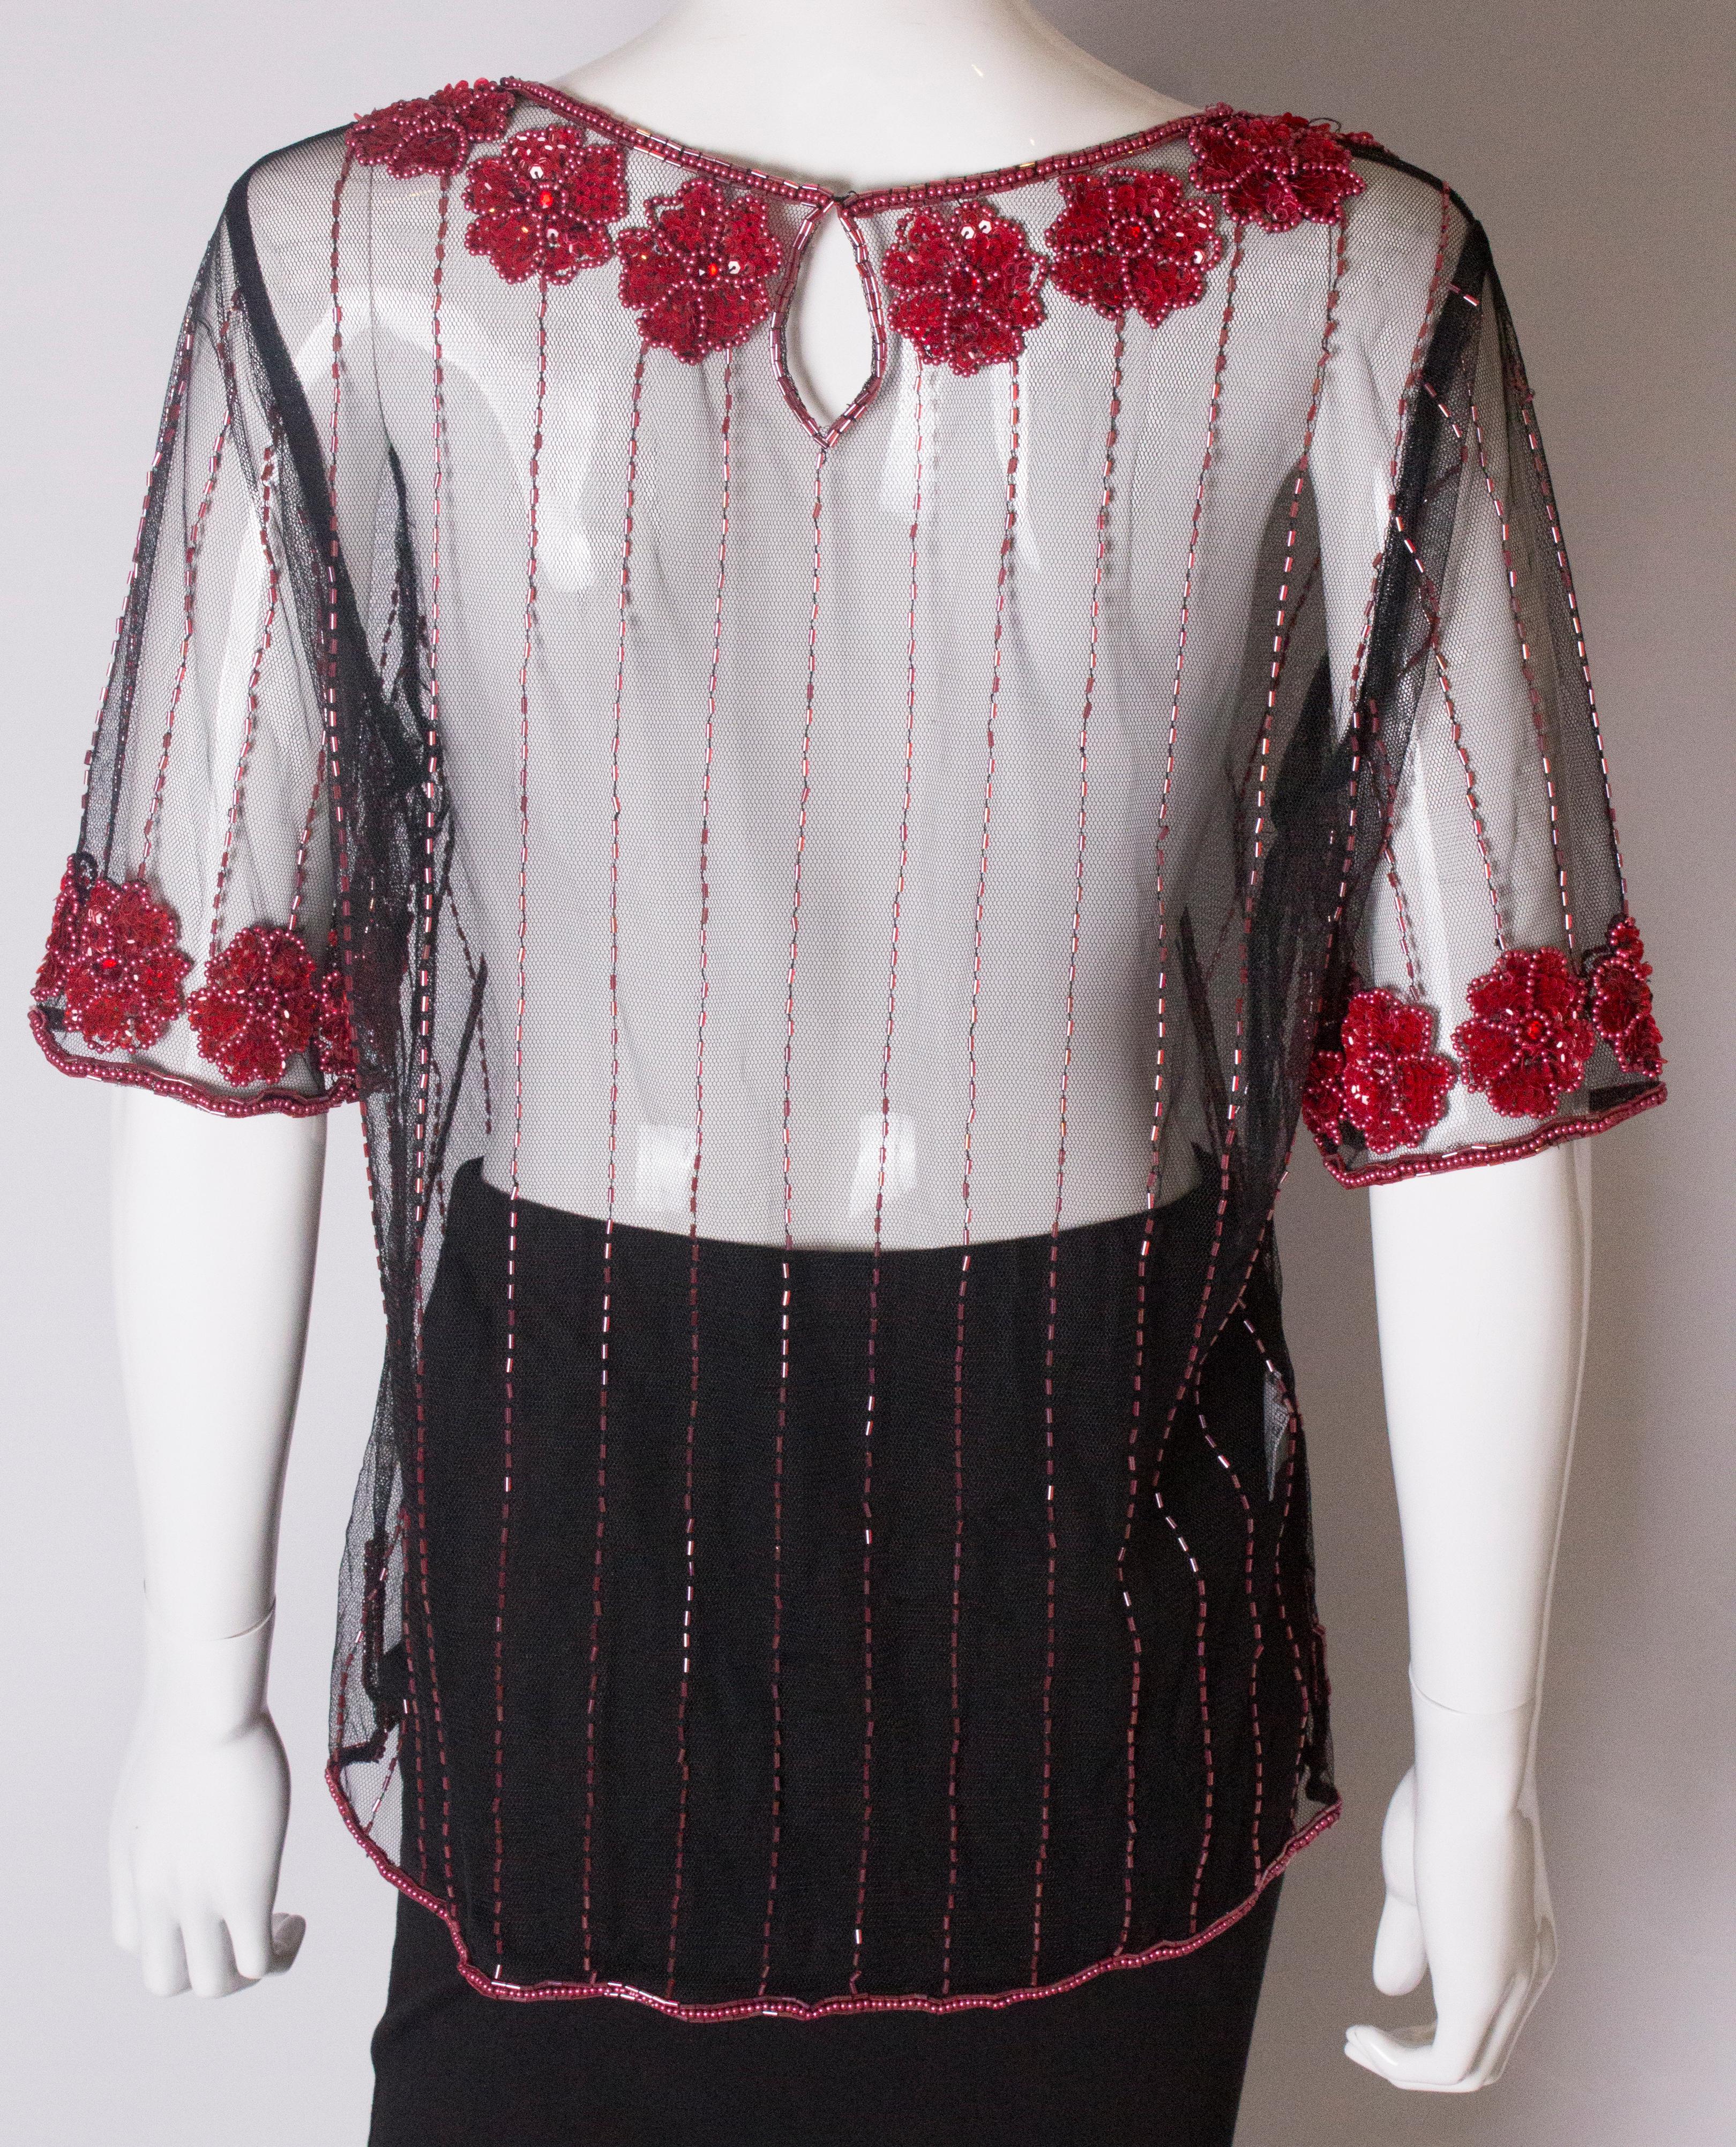 Net T Shirt Shirt with Sequin and Bead Embellishment, 1970s For Sale 3